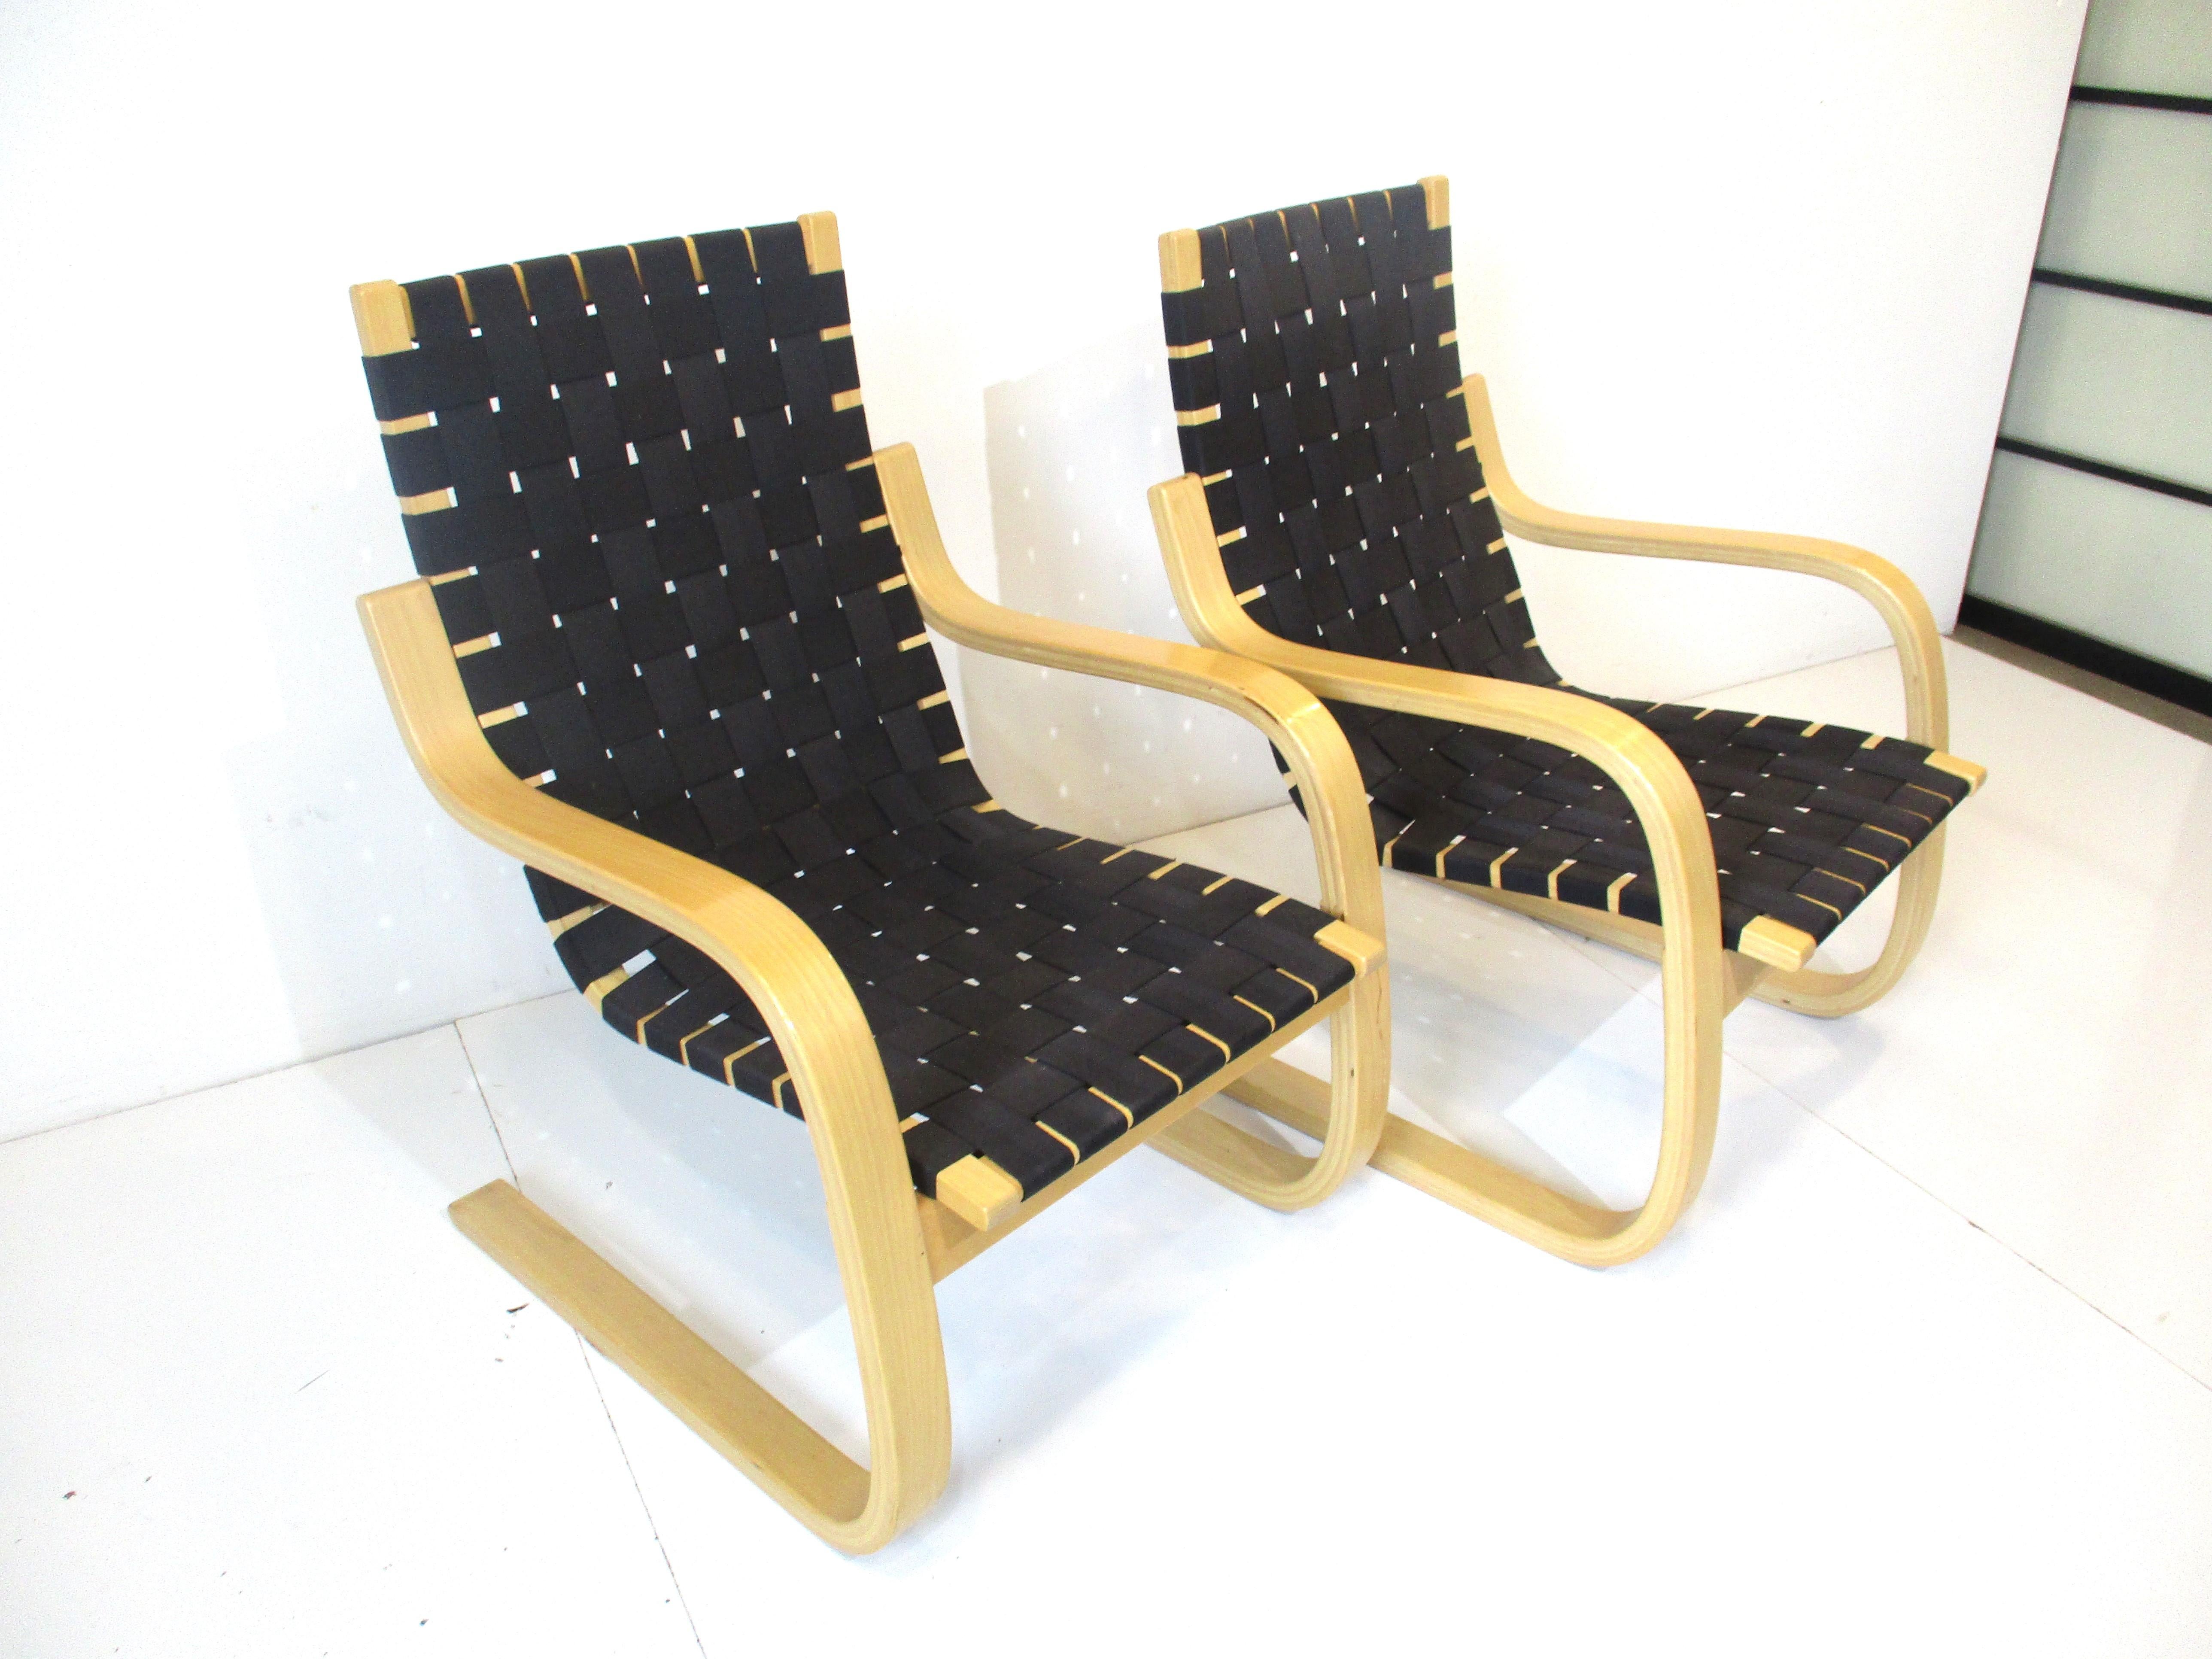 A pair of sculptural bent birch wood framed lounge chairs with black woven strap seating by Finish designer Alvar Alto. A very comfortable Classic form with ergonomics in mind, retains the label from the importer ICF manufactured in Finland by Artek